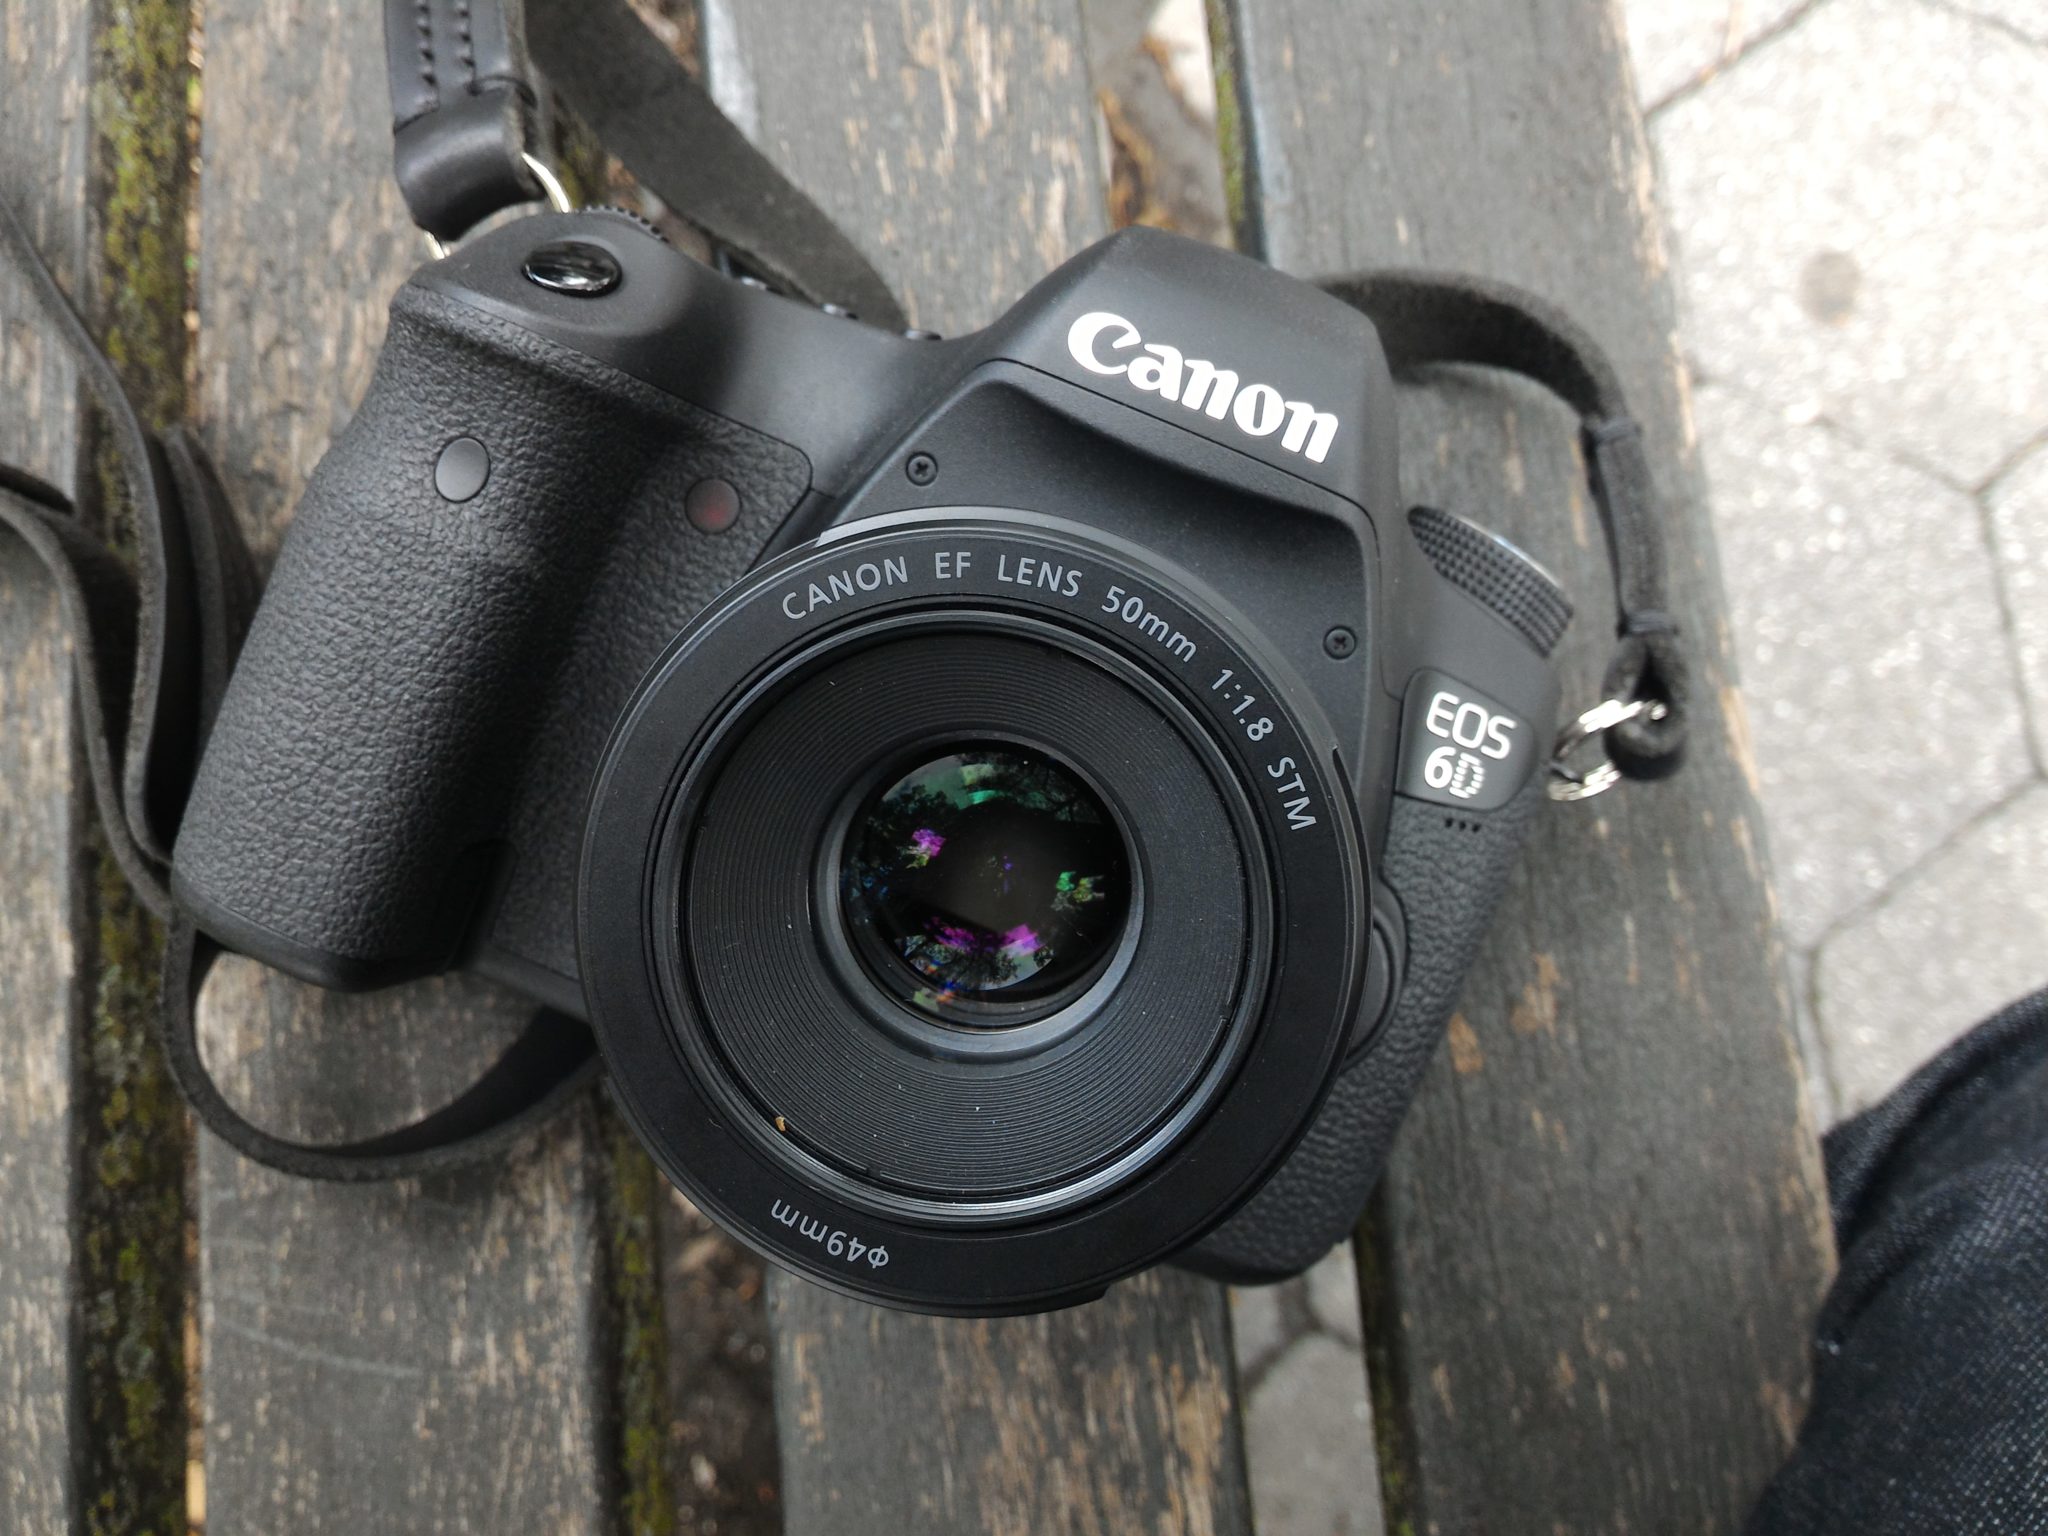 First Impressions: Canon 50mm f1.8 STM